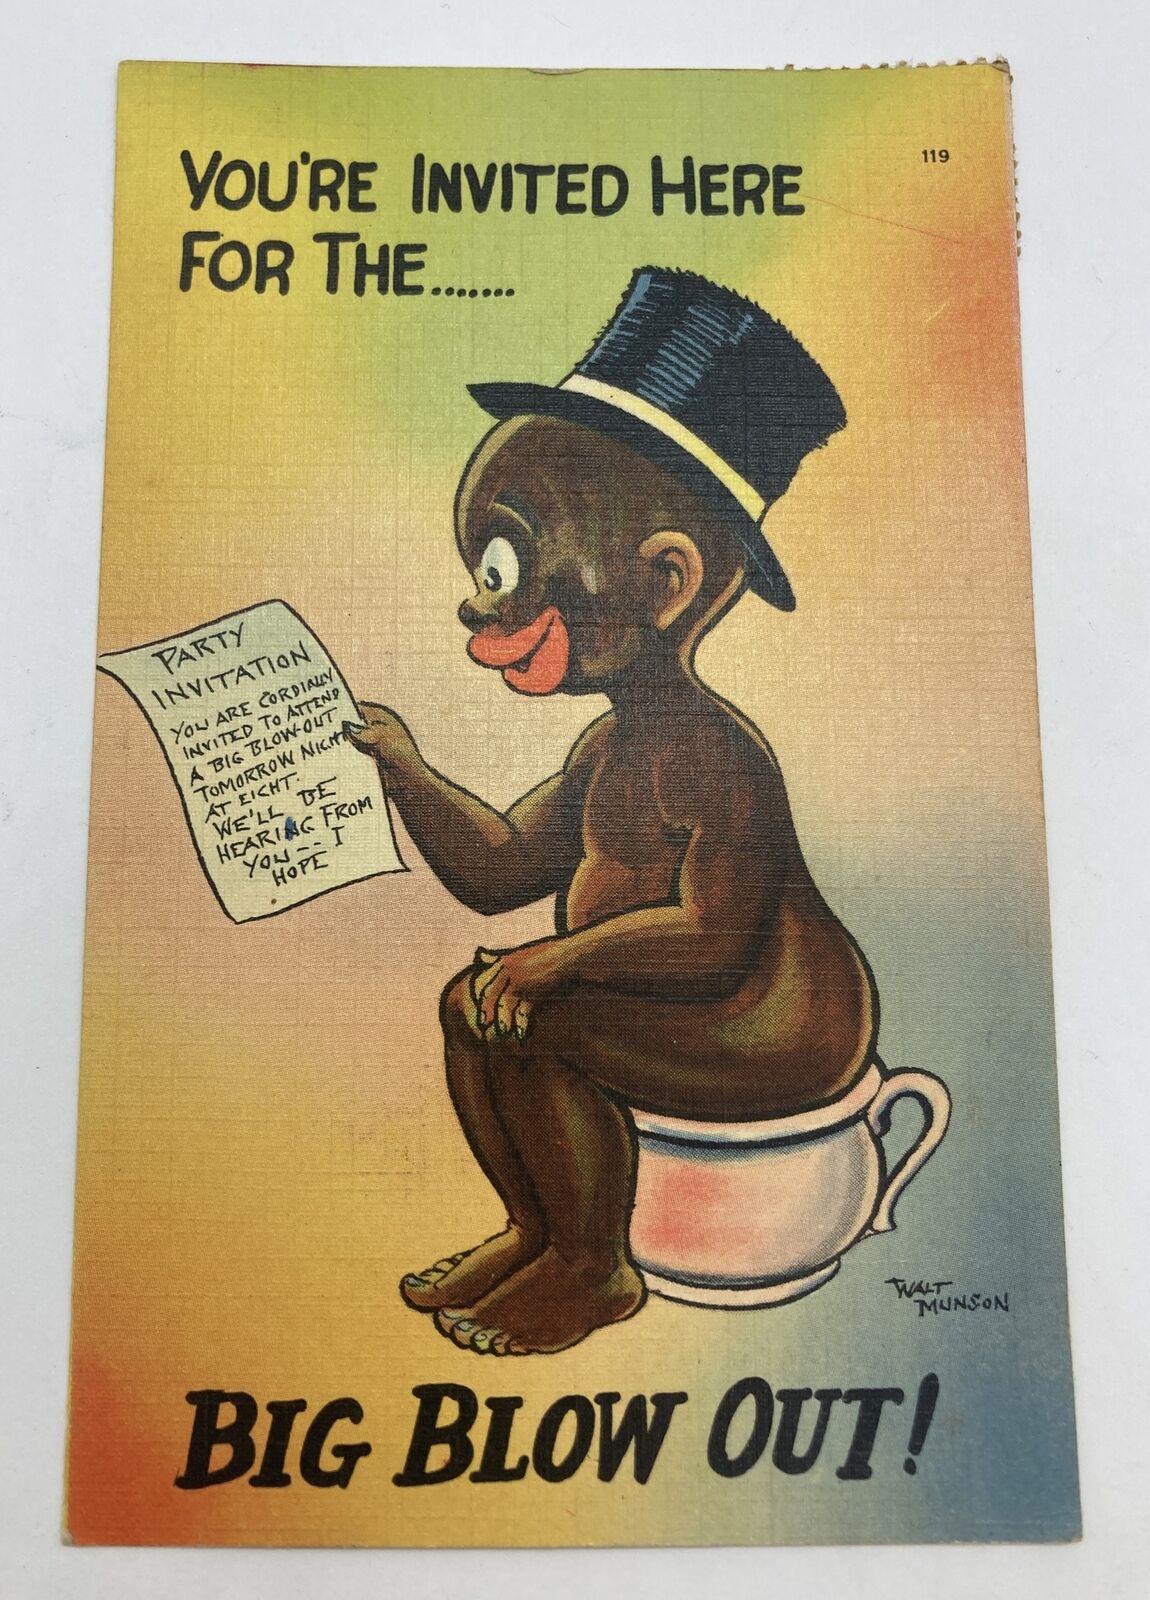 POSTCARD VINTAGE - You’re Invited Here For The… Big Blow Out Posted 1943 Comedy